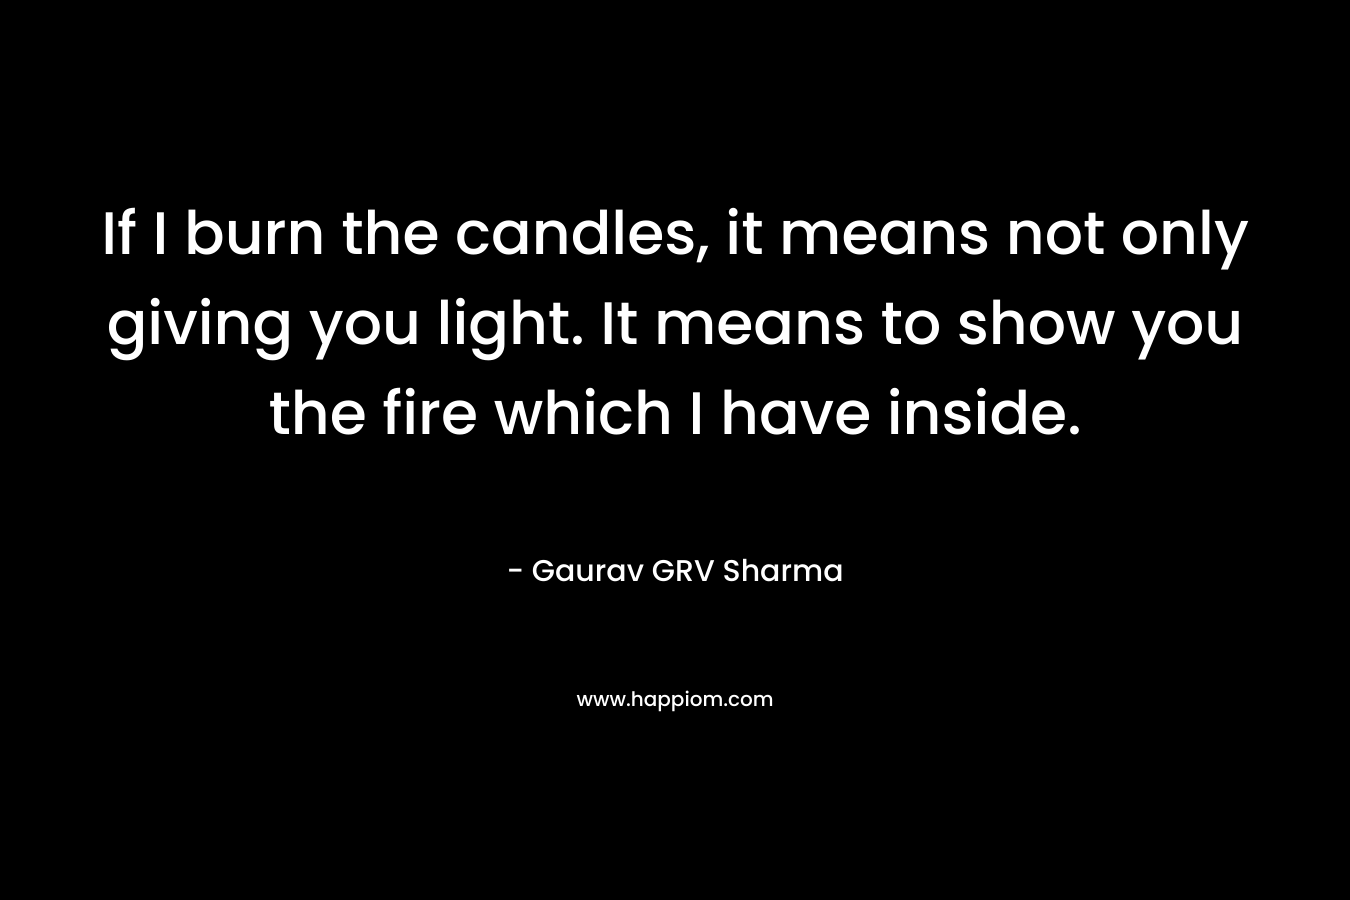 If I burn the candles, it means not only giving you light. It means to show you the fire which I have inside. – Gaurav GRV Sharma